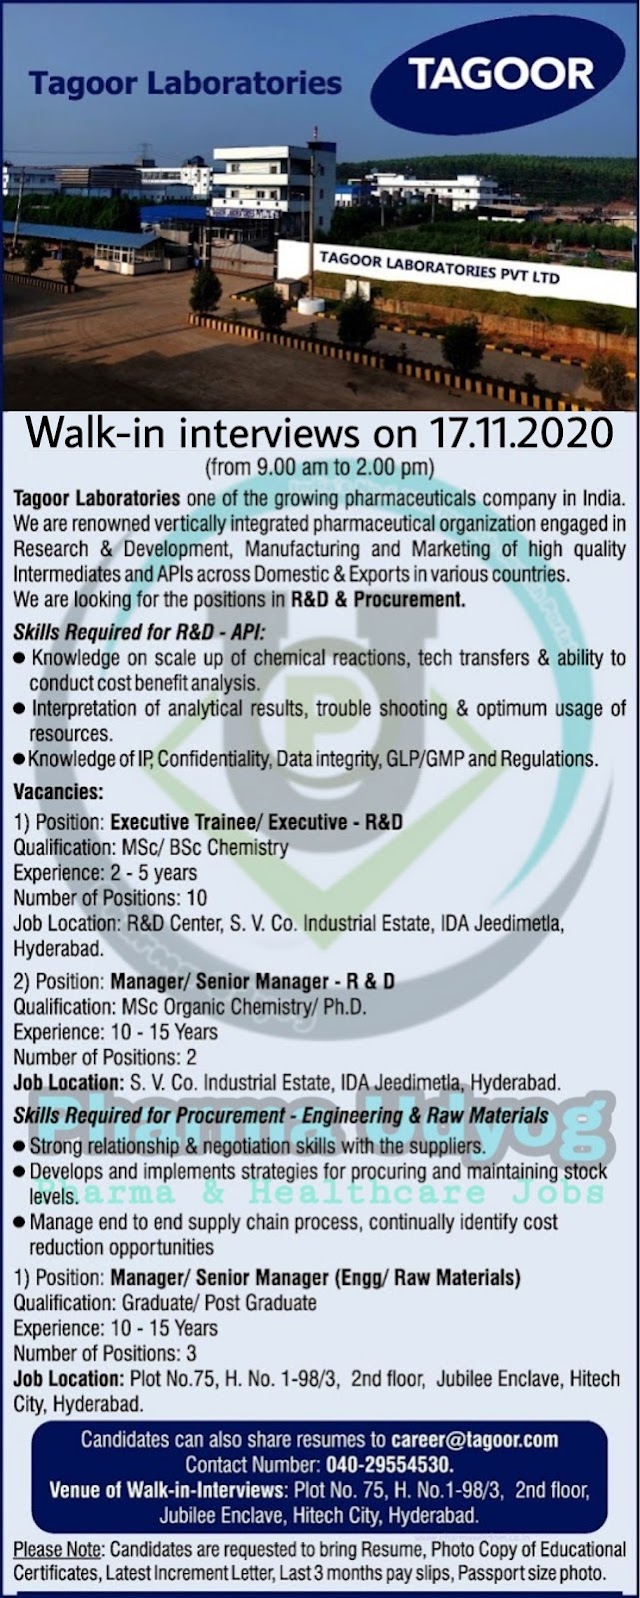 Tagoor Laboratories | Walk-In for R&D / Procurement (Engineering / Raw Materials) on 17th Nov 2020 at Hyderabad